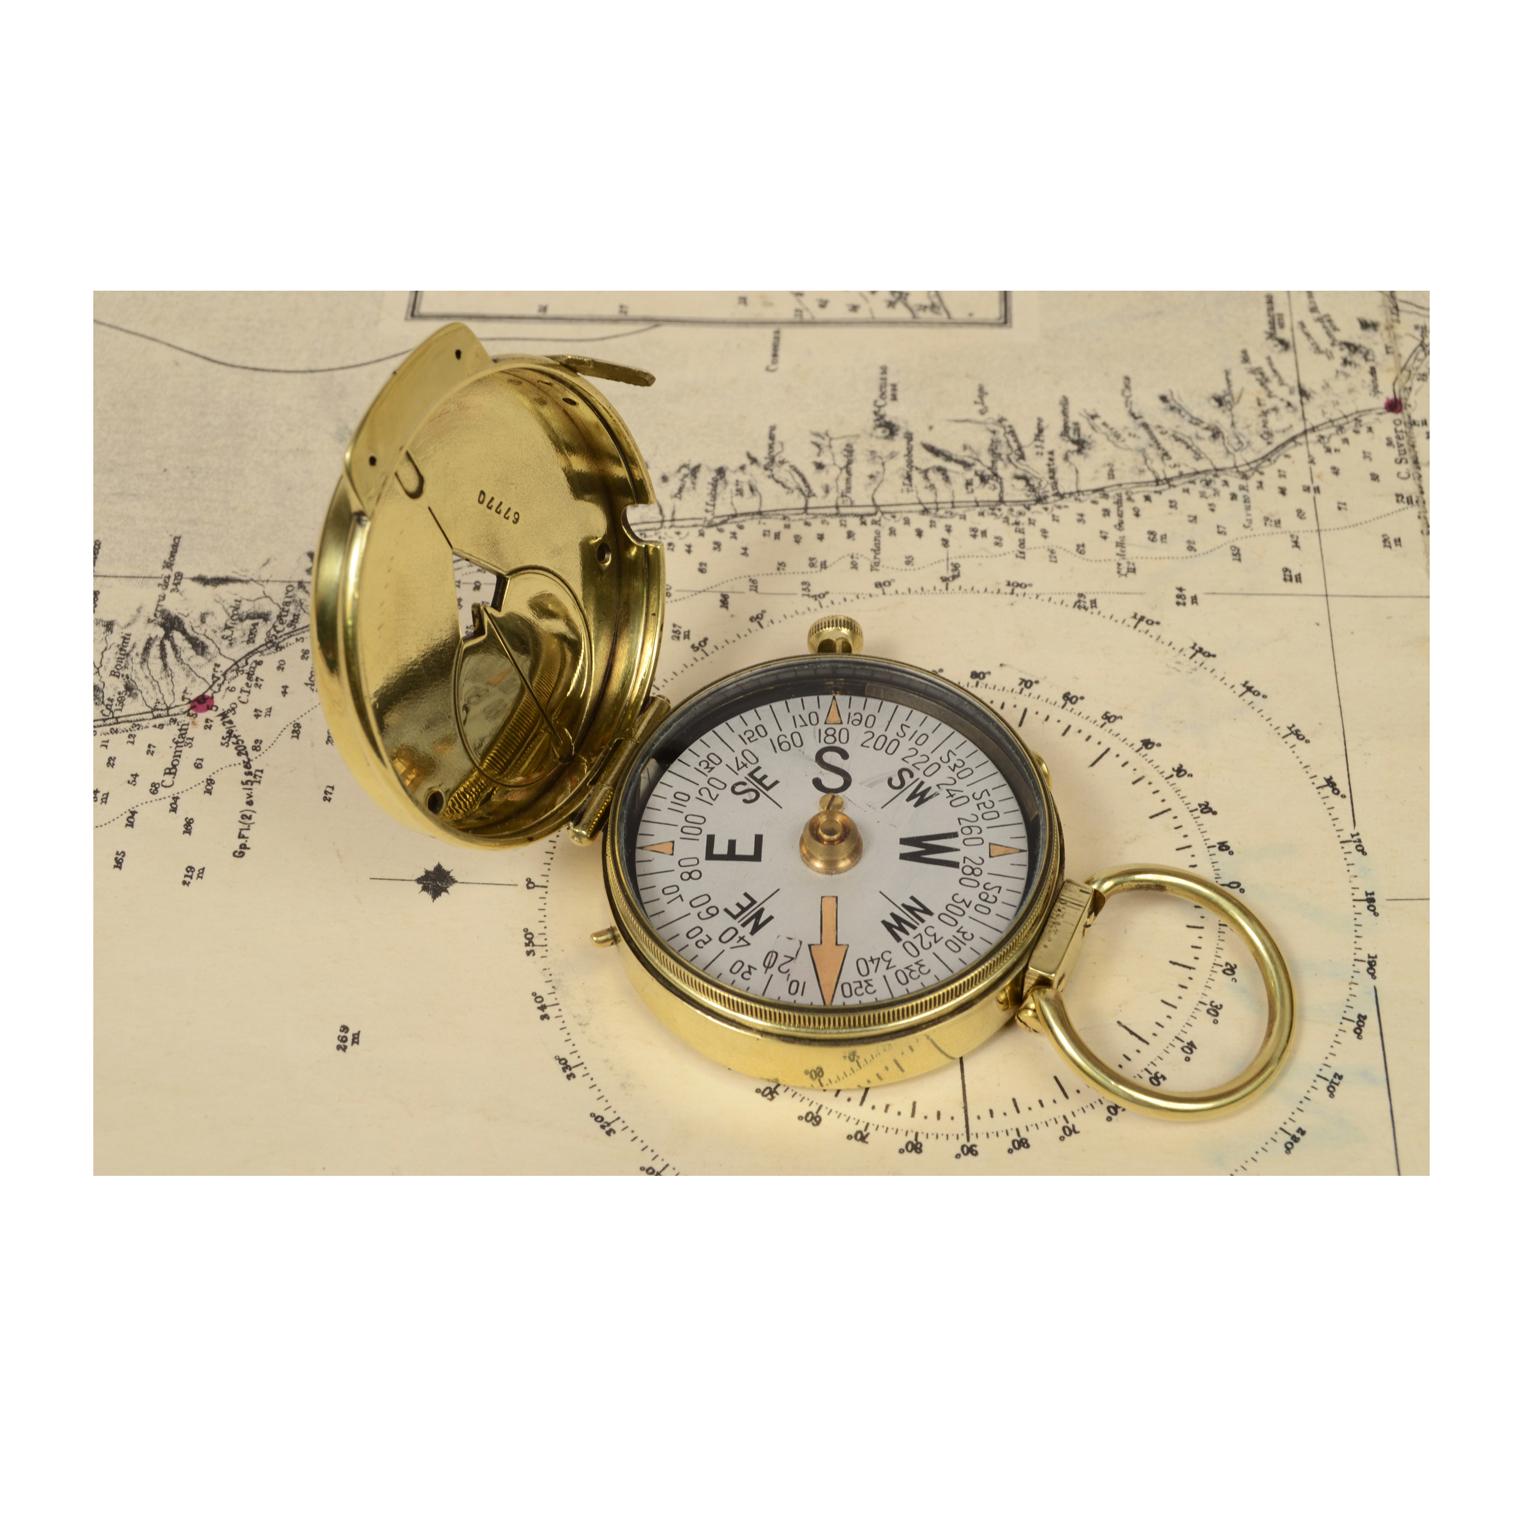 Rare magnetic compass for nautical detection, of brass, signed Cruchon & Emons Berne n. 67770 of 1918 made for the U.S Engineer Corps. It is a small compass, diameter 5.3 cm - 2.1 inch, height 1.8 cm, 0.6 inch; typically used in recreational